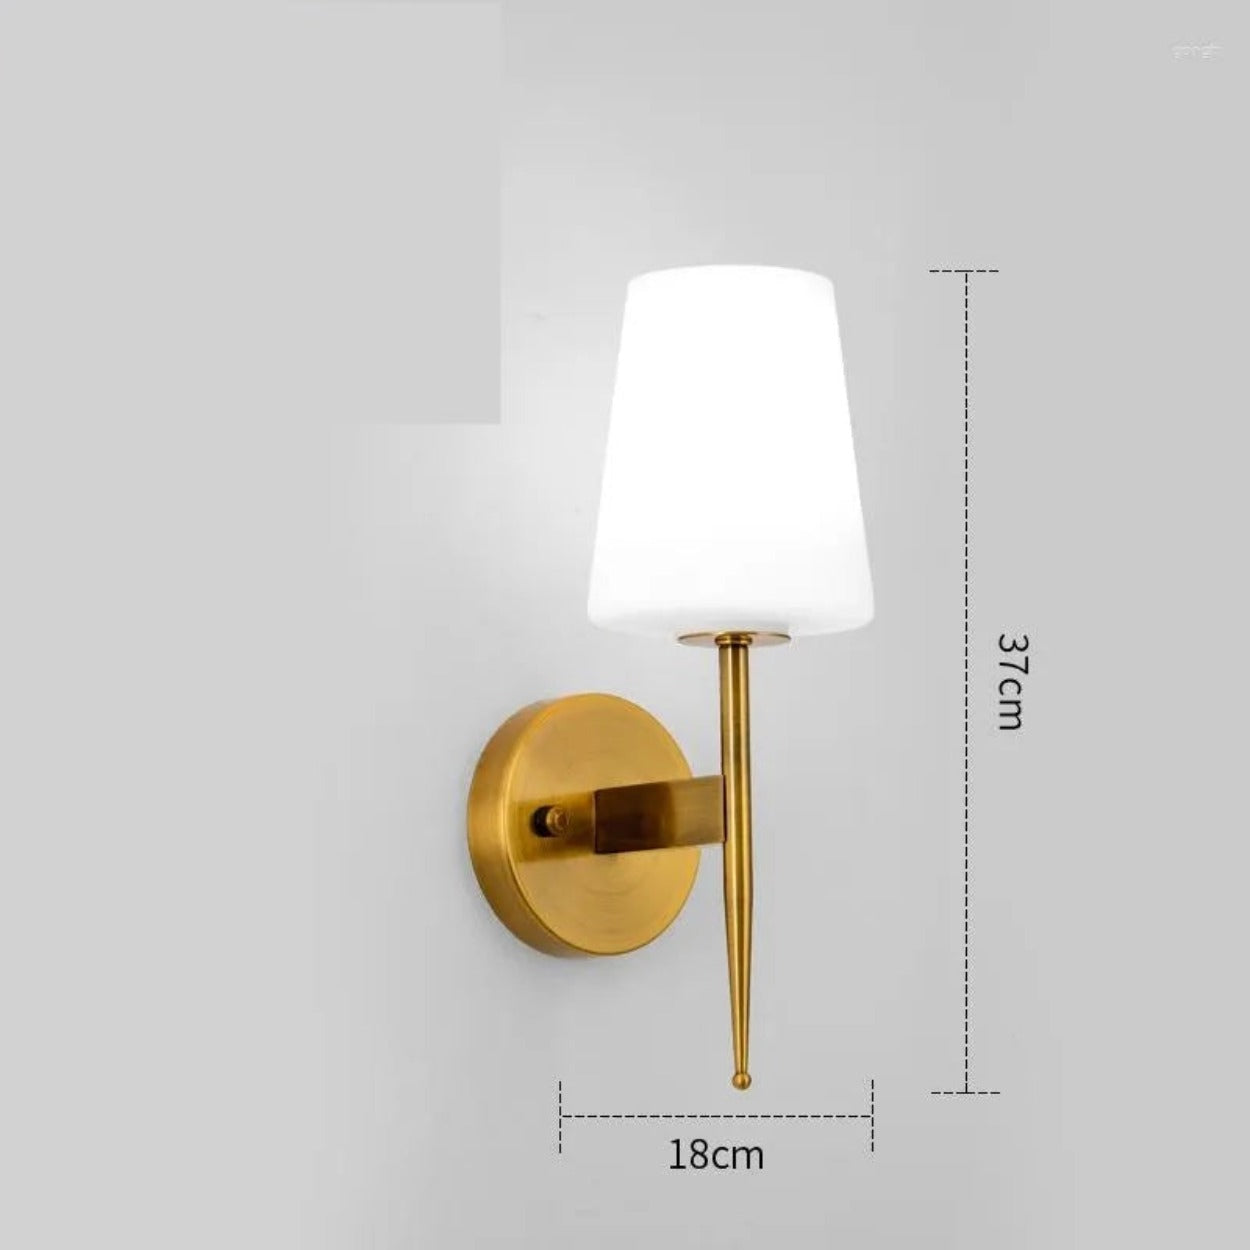 ANKUR GRACE ELEGANT WHITE GLASS AND METAL WALL LIGHT SINGLE AND DOUBLE LAMP OPTIONS